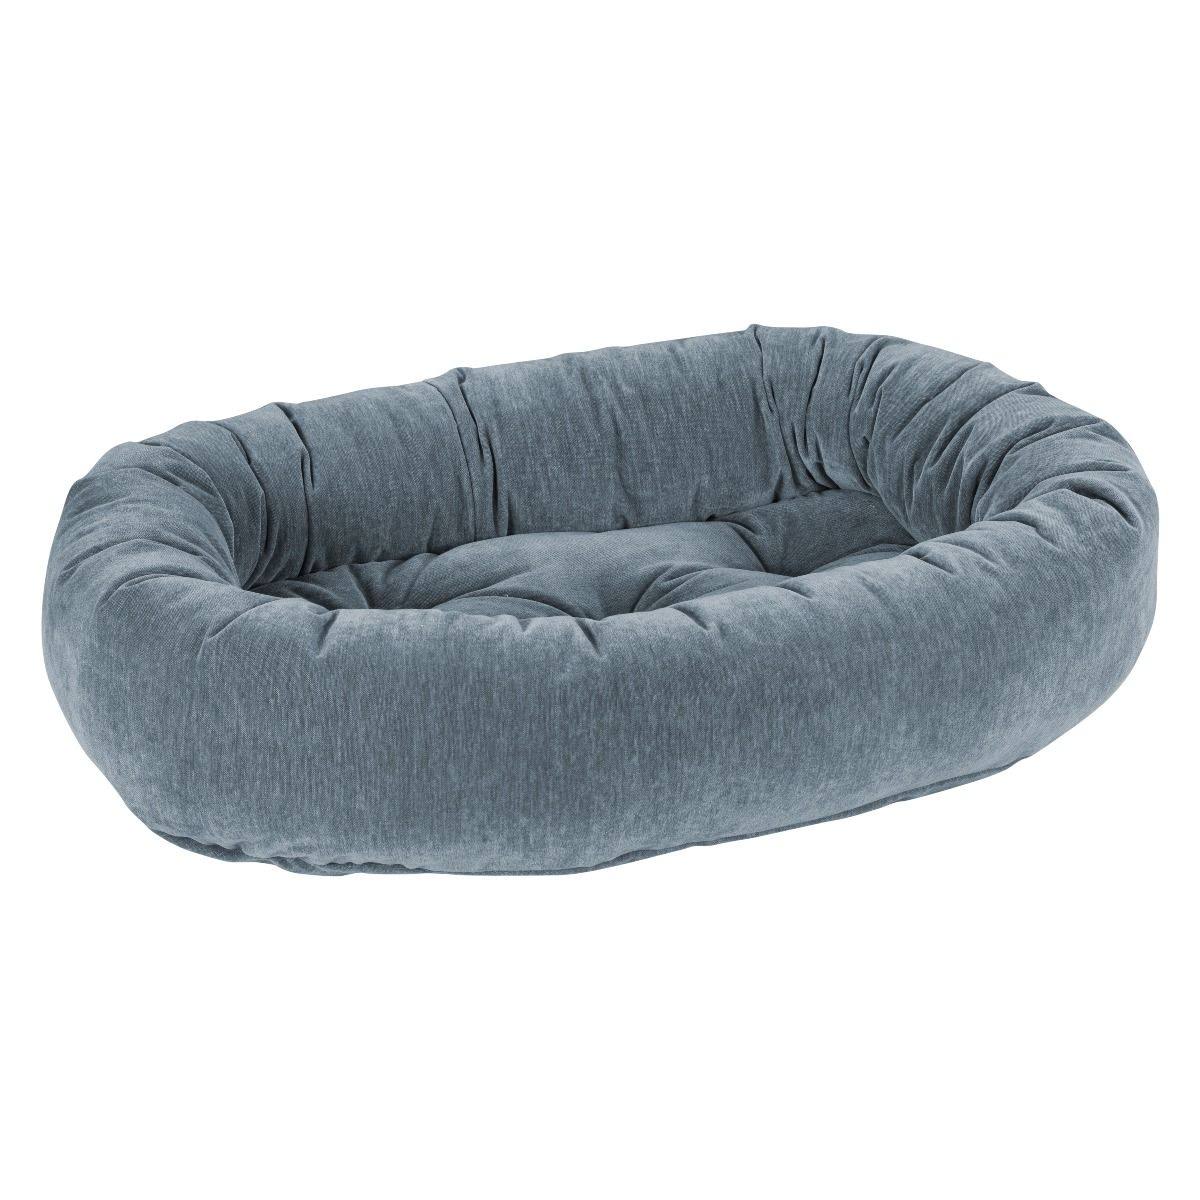 Bowsers Mineral Chenille Donut Dog Bed M